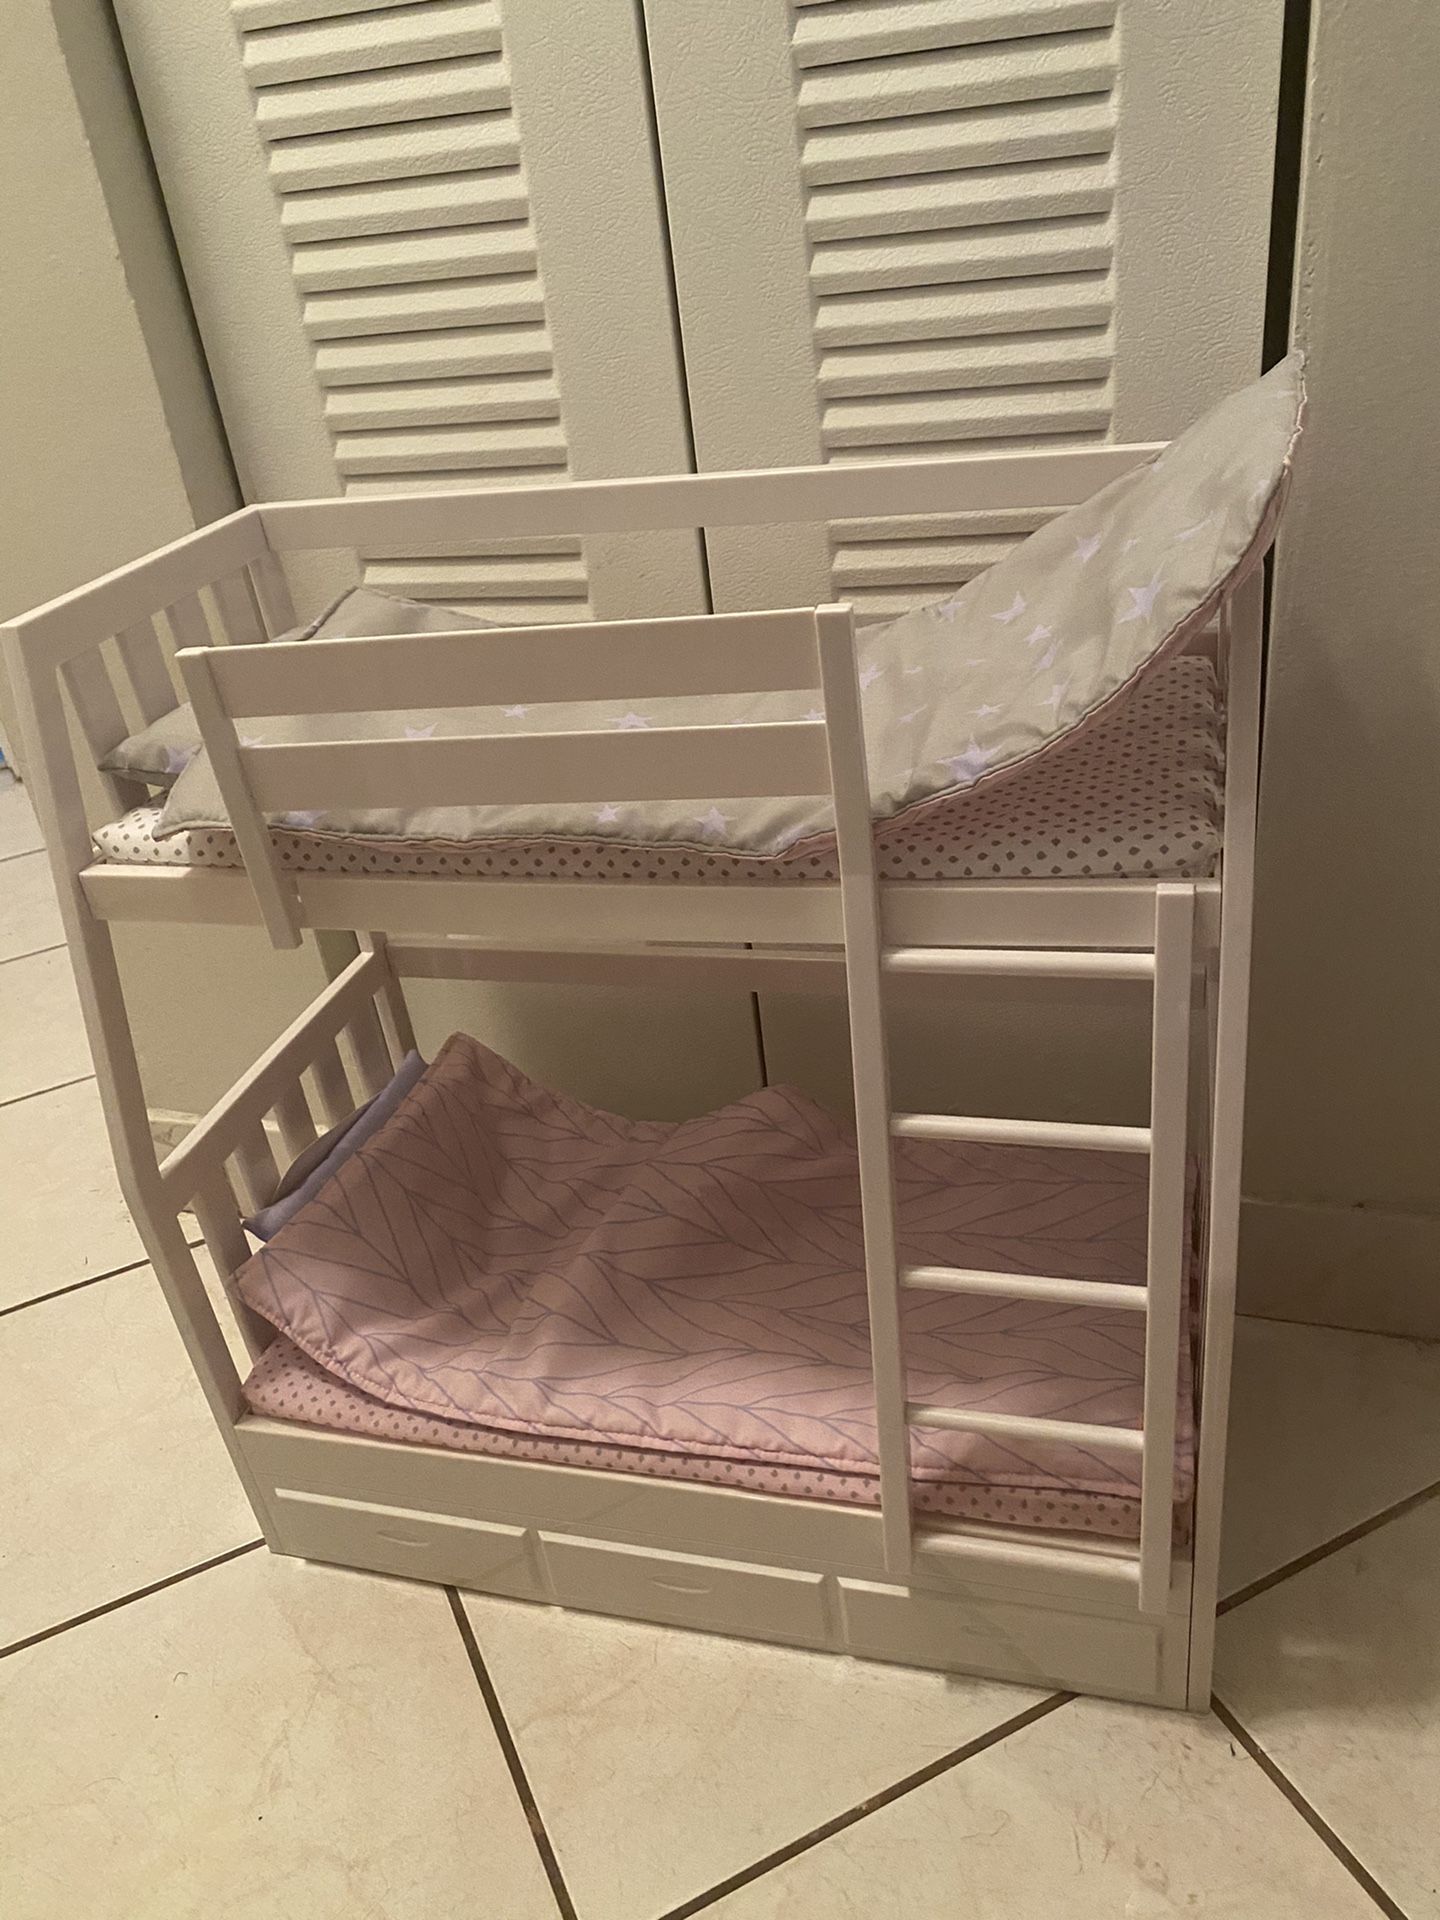 Our Generation Bunk Beds for 18" Dolls